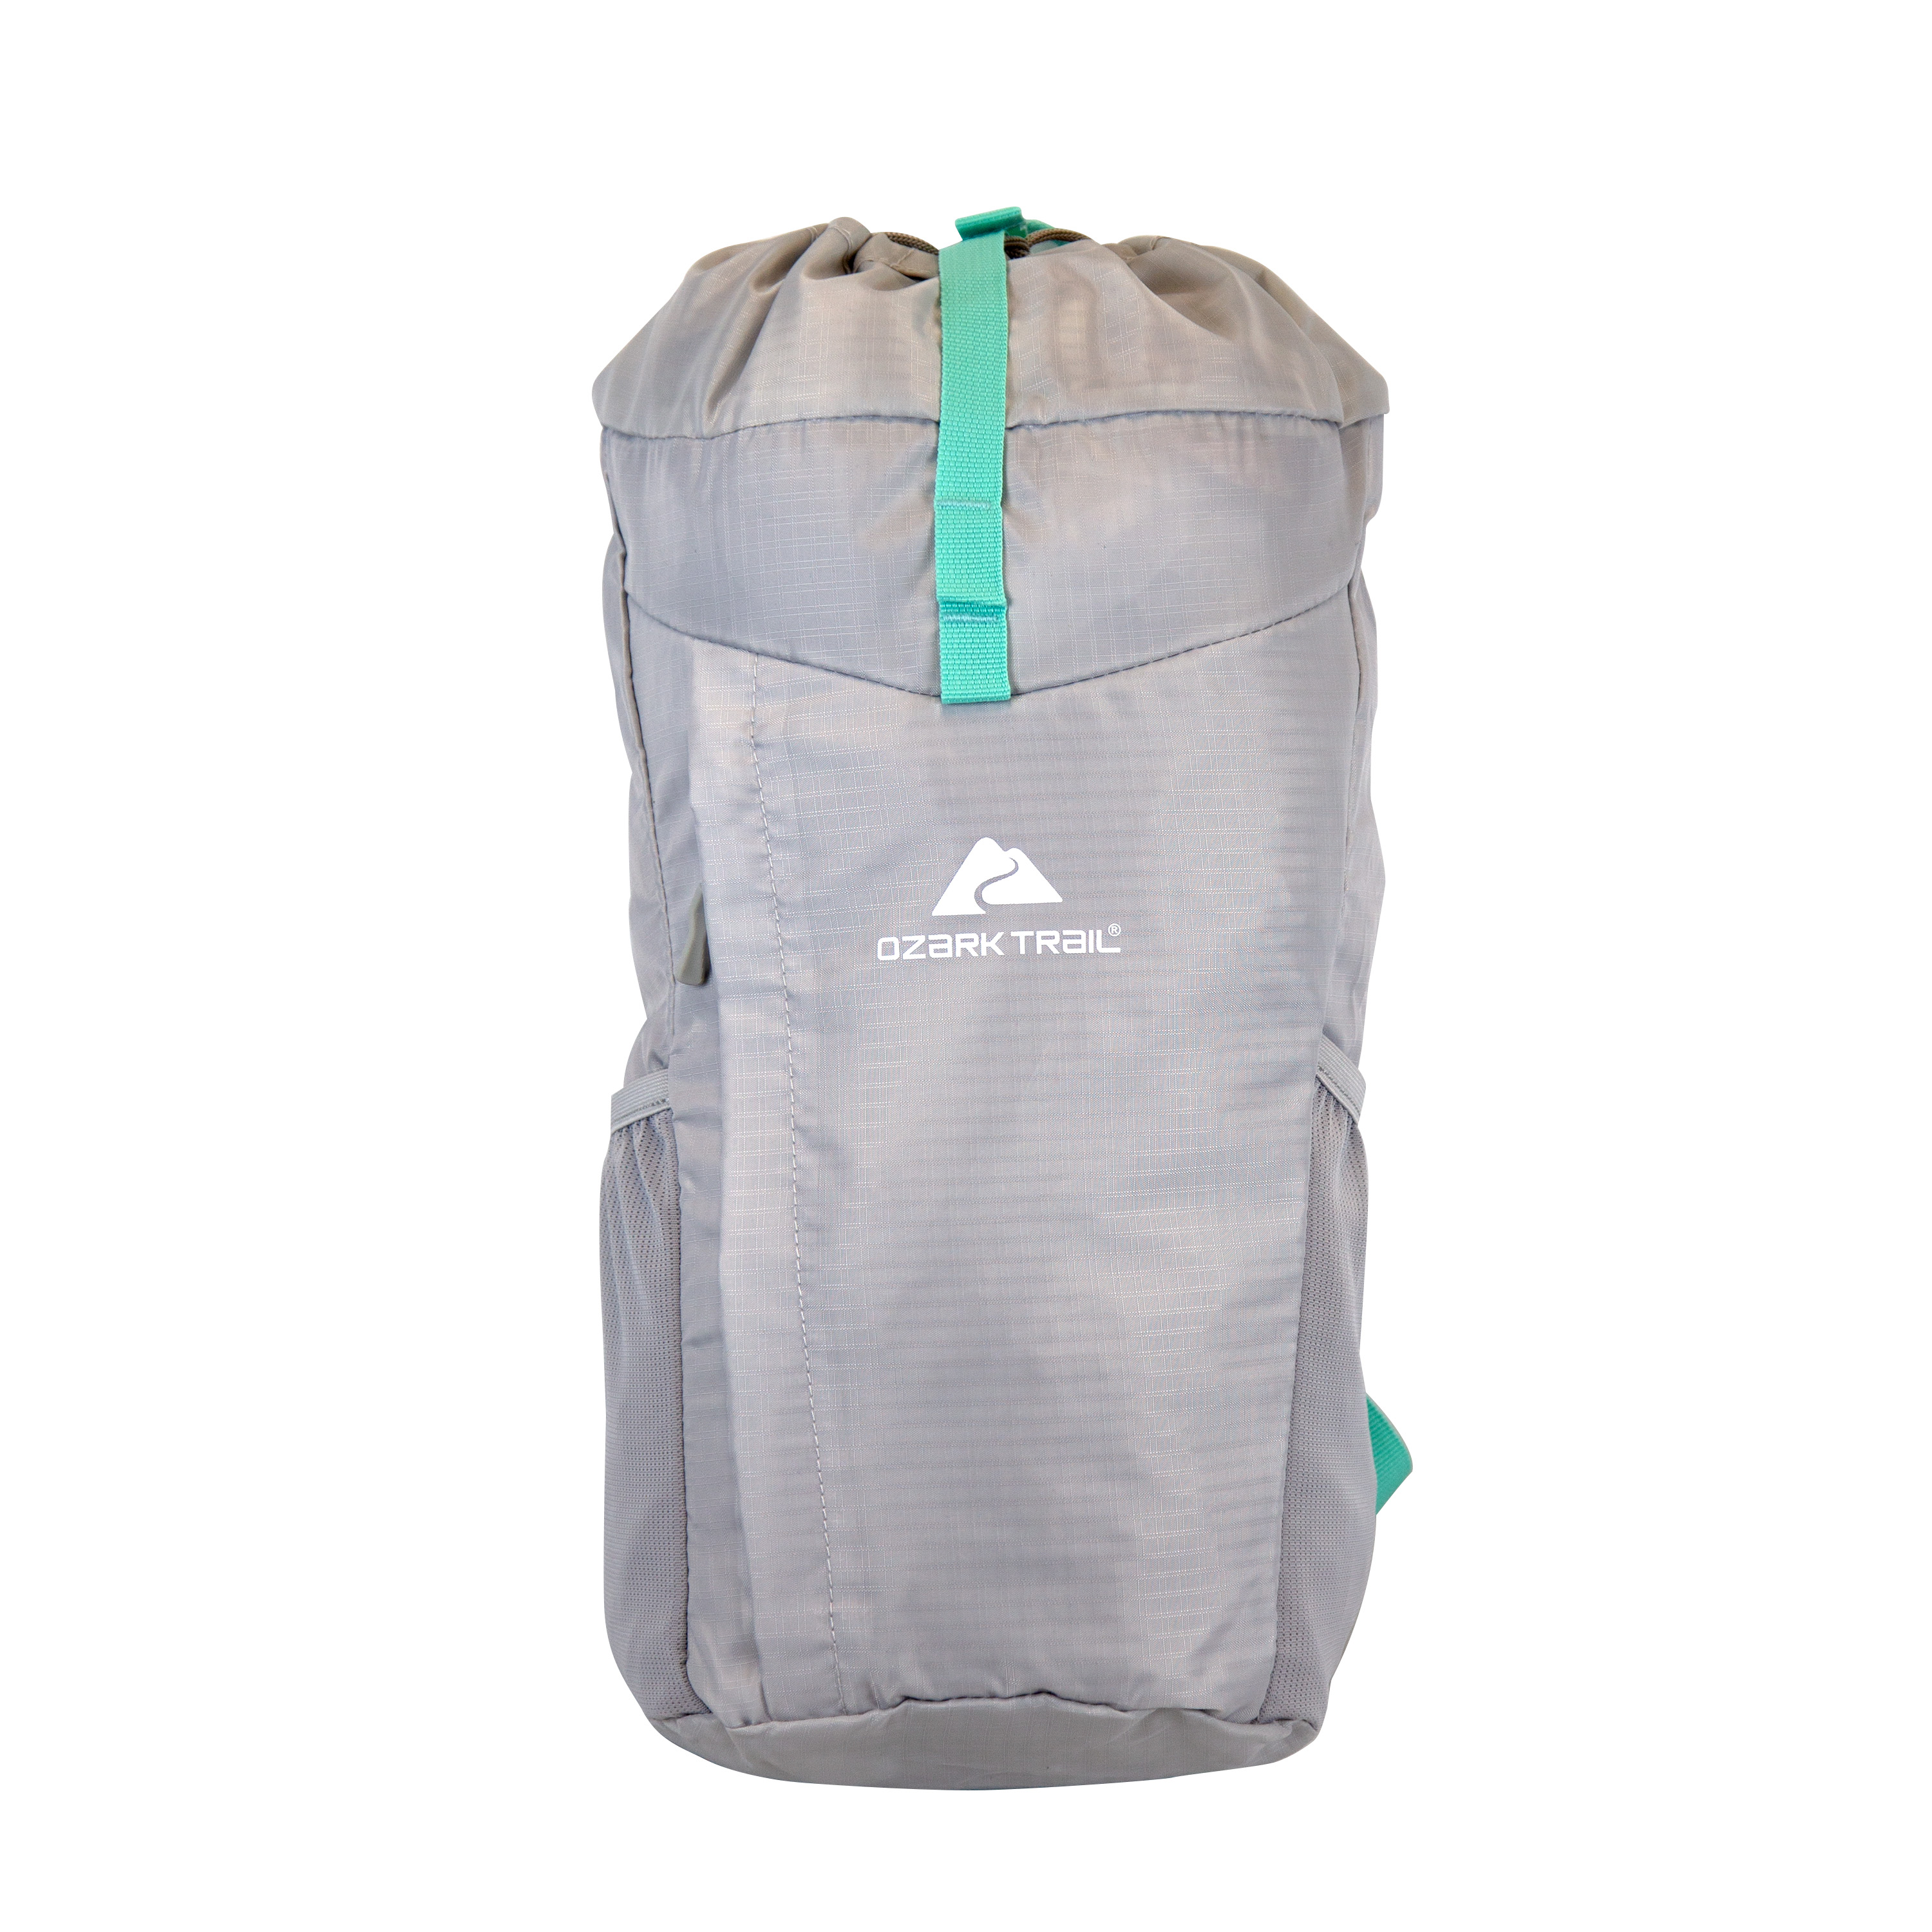 Ozark Trail 20L Corsicana Roll-Top Backpack, Hydration-Compatible, Gray - image 2 of 8